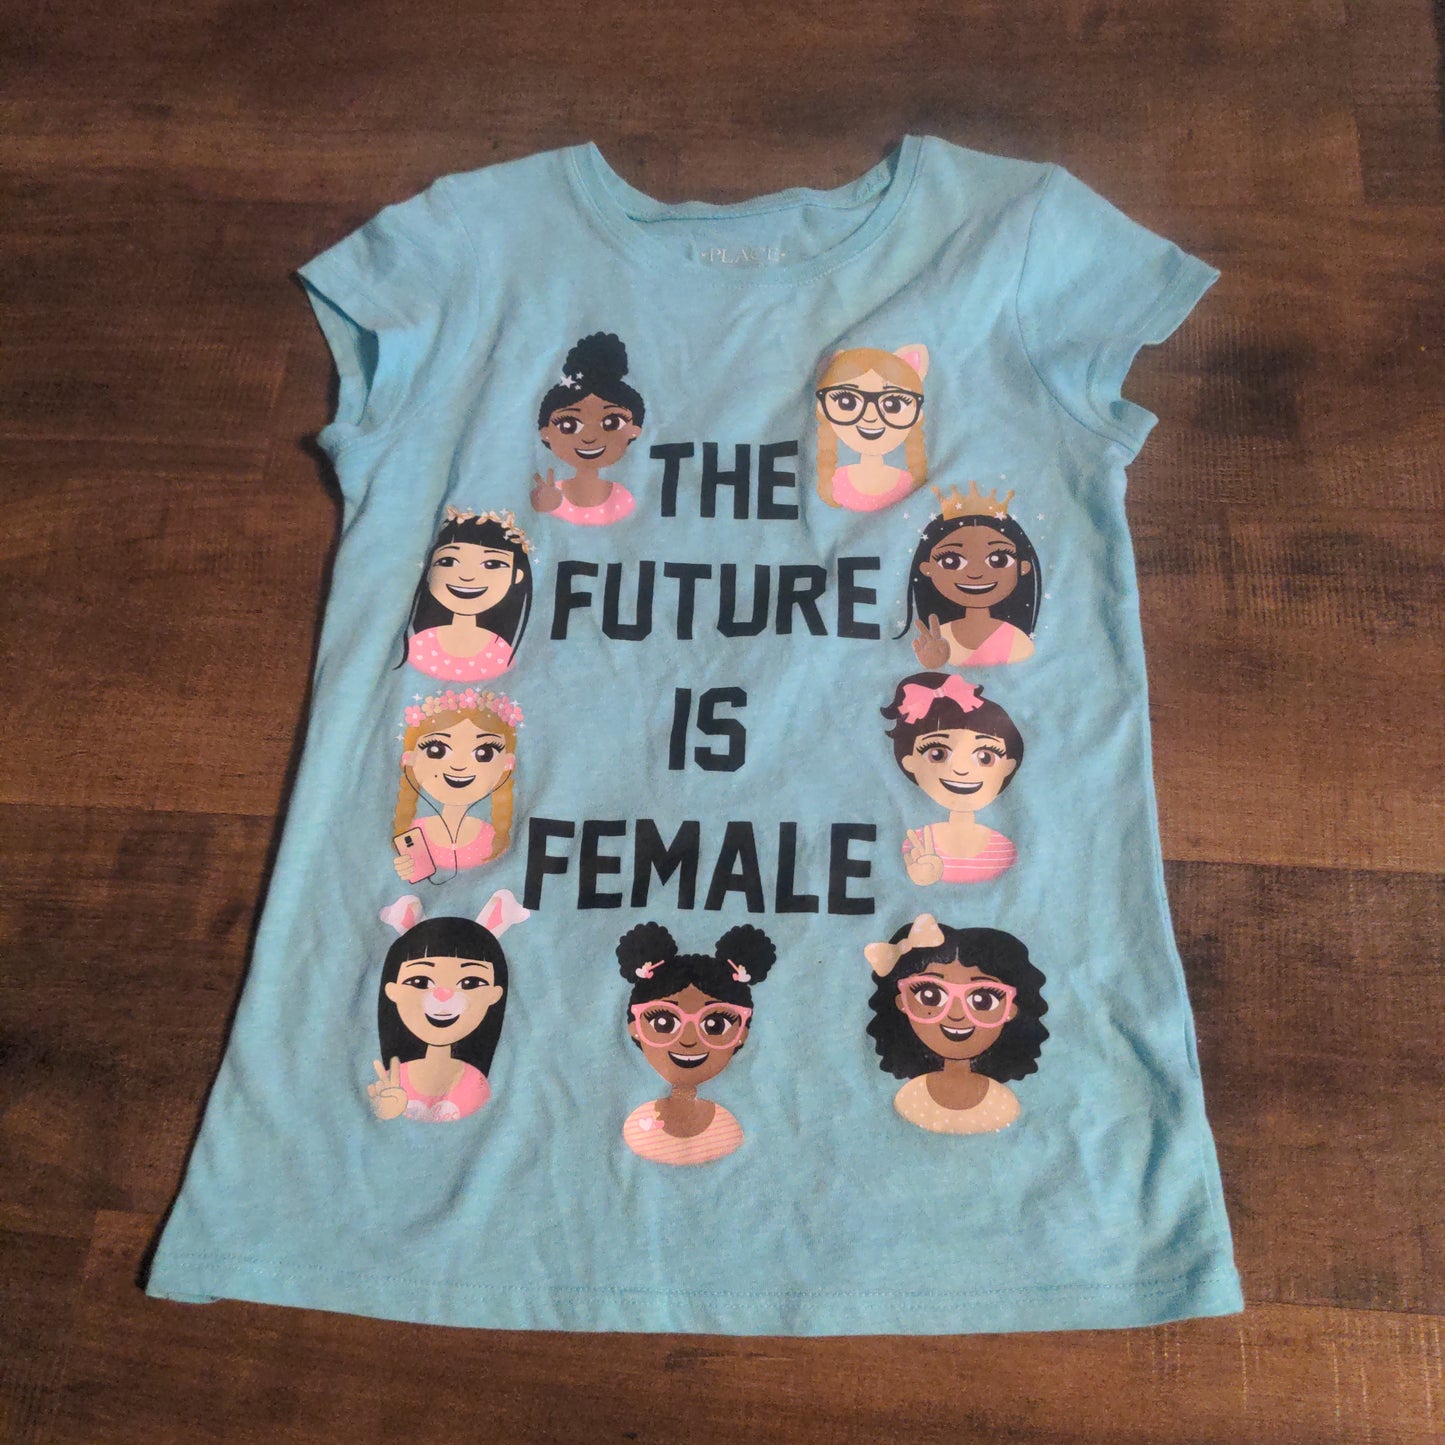 The Future Is Female shirt size 7/8